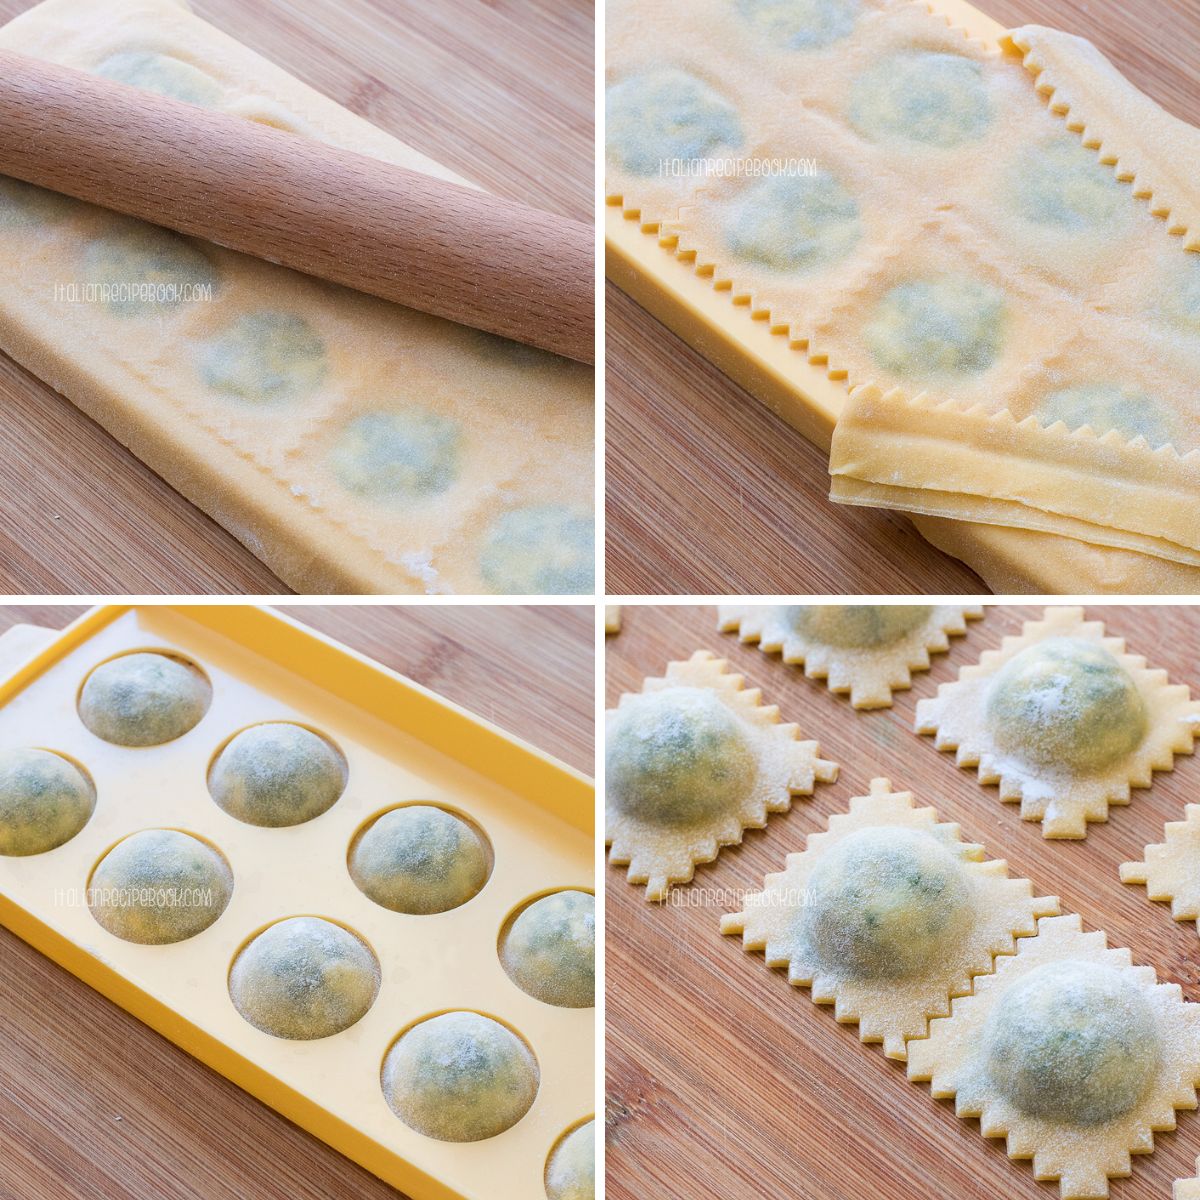 extracting ravioli from the stamp